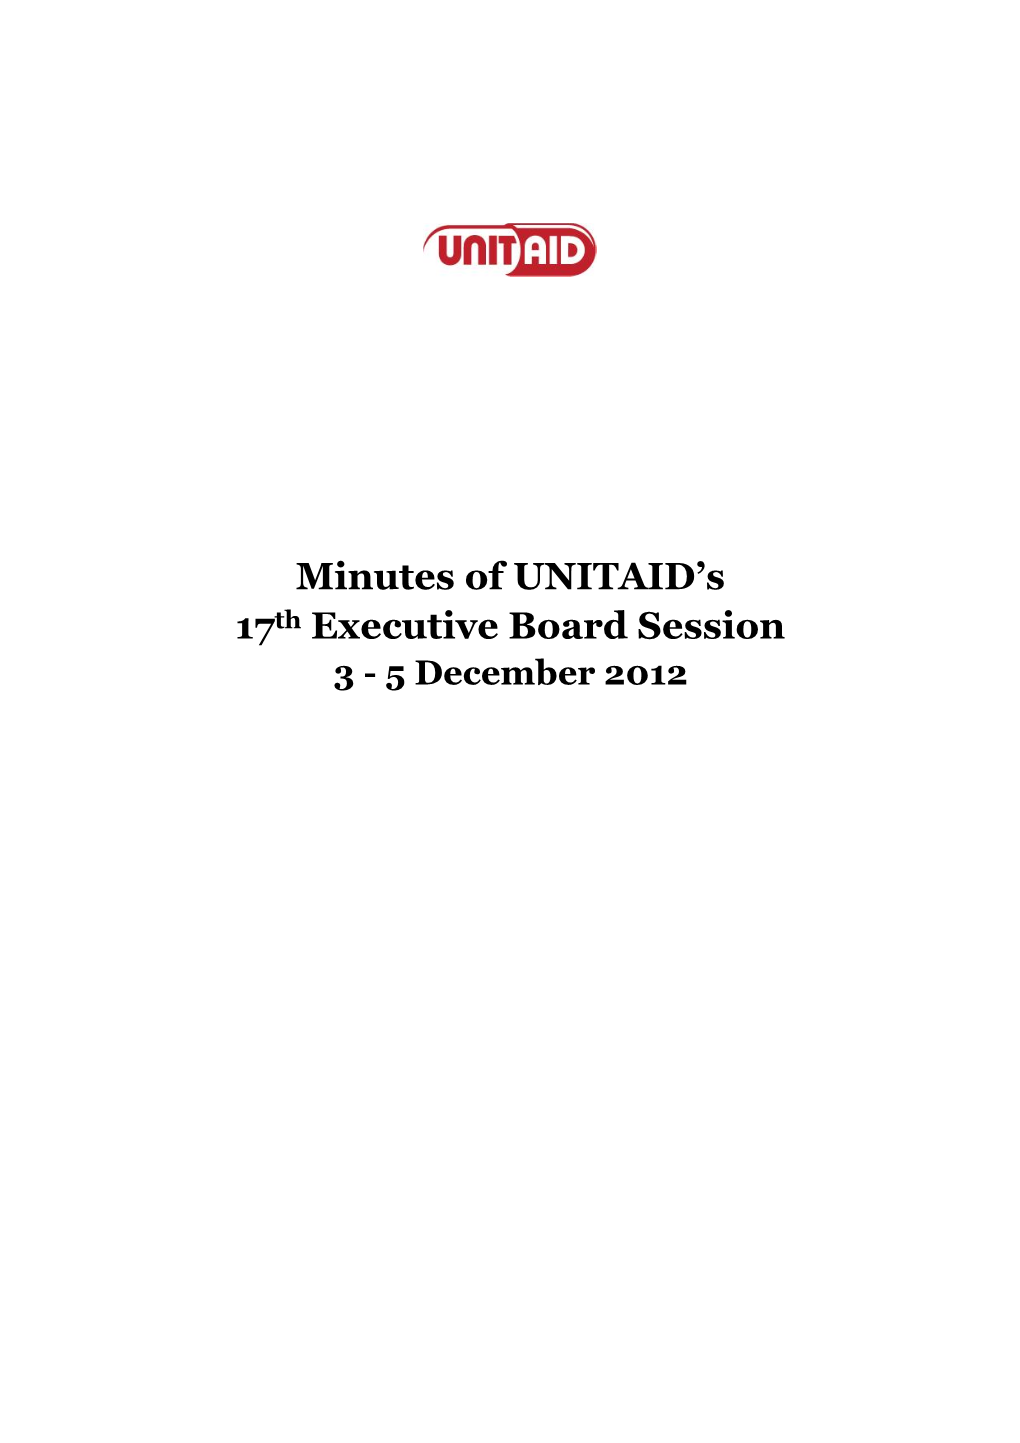 Minutes of UNITAID’S 17Th Executive Board Session 3 - 5 December 2012